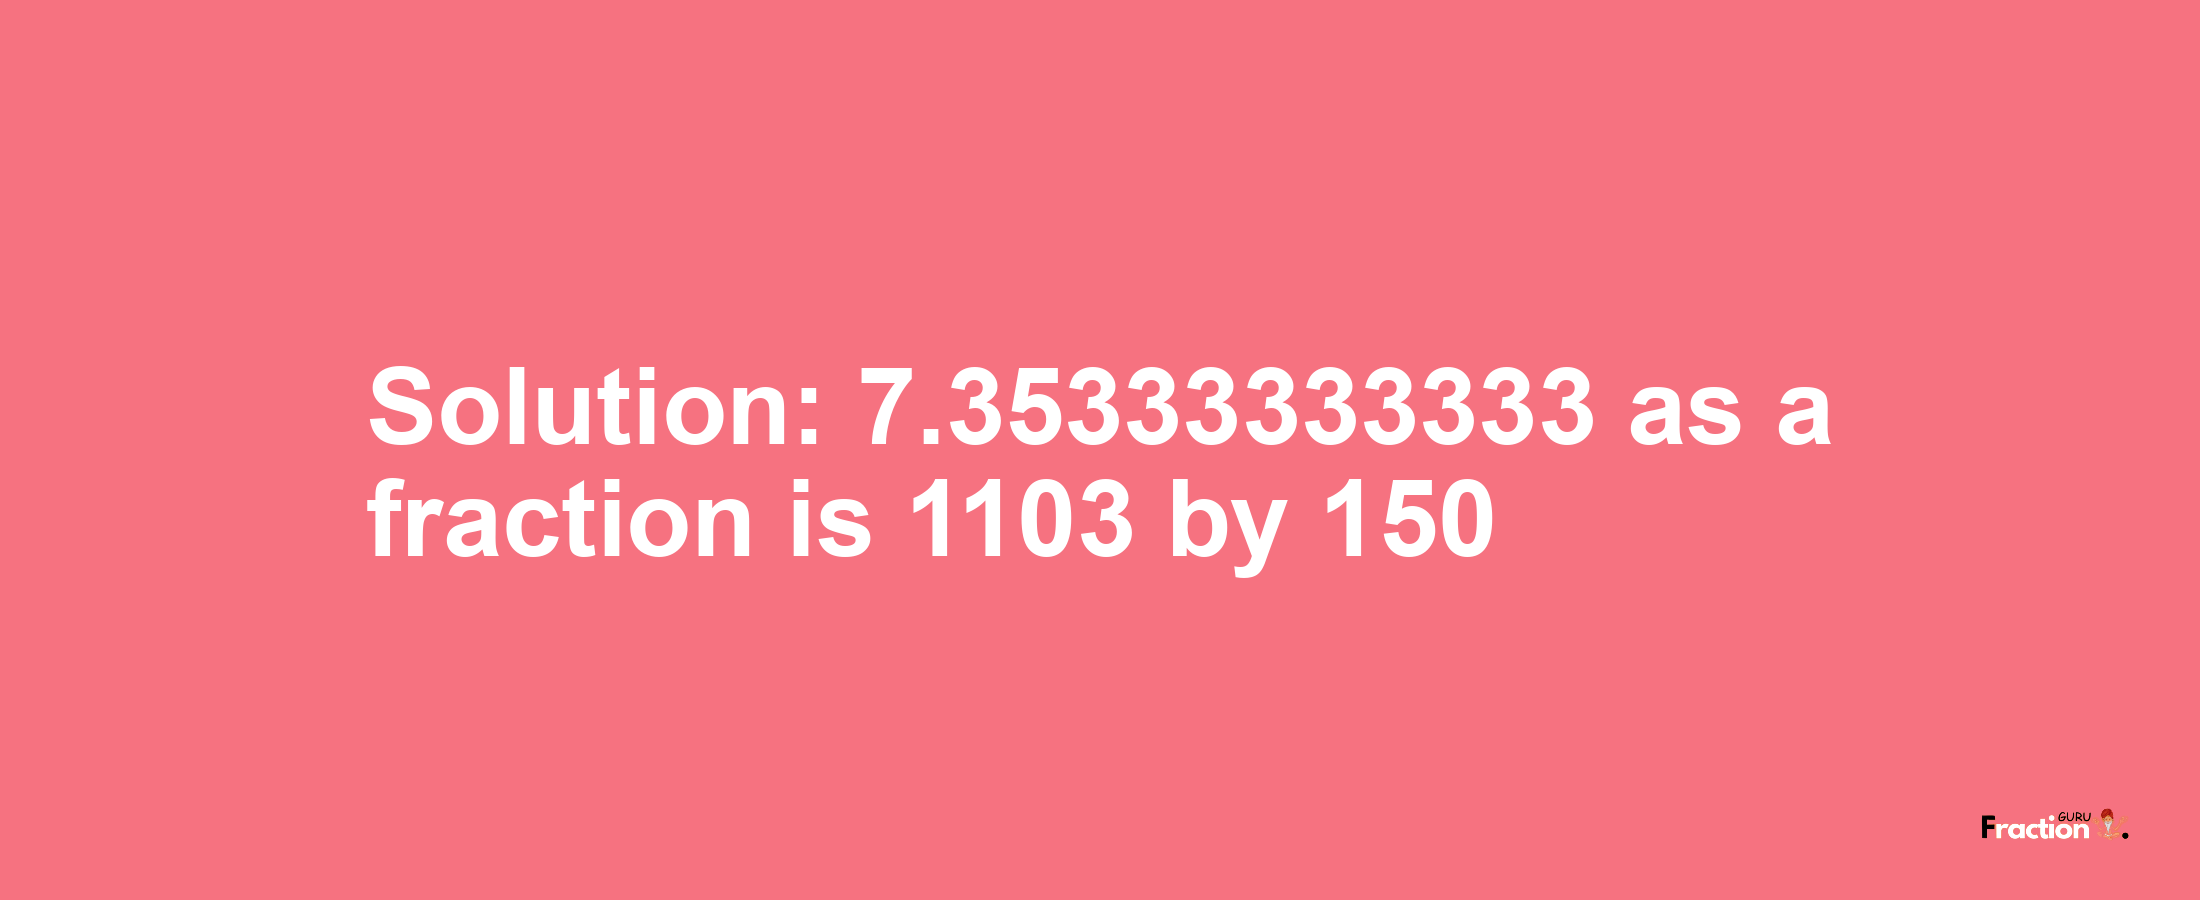 Solution:7.35333333333 as a fraction is 1103/150